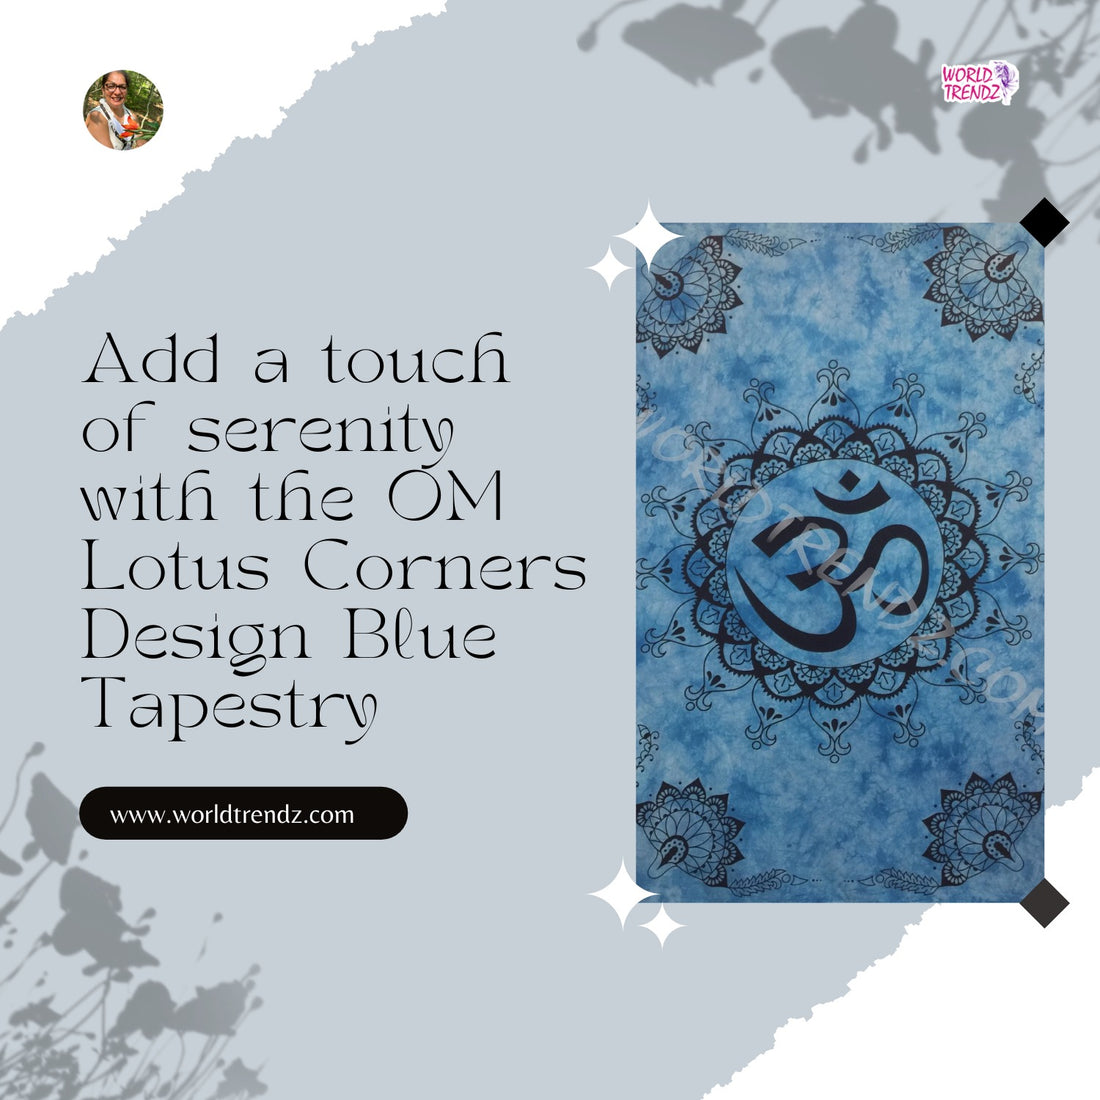 Transform Your Space with the OM Lotus Corners Design Blue Tapestry!